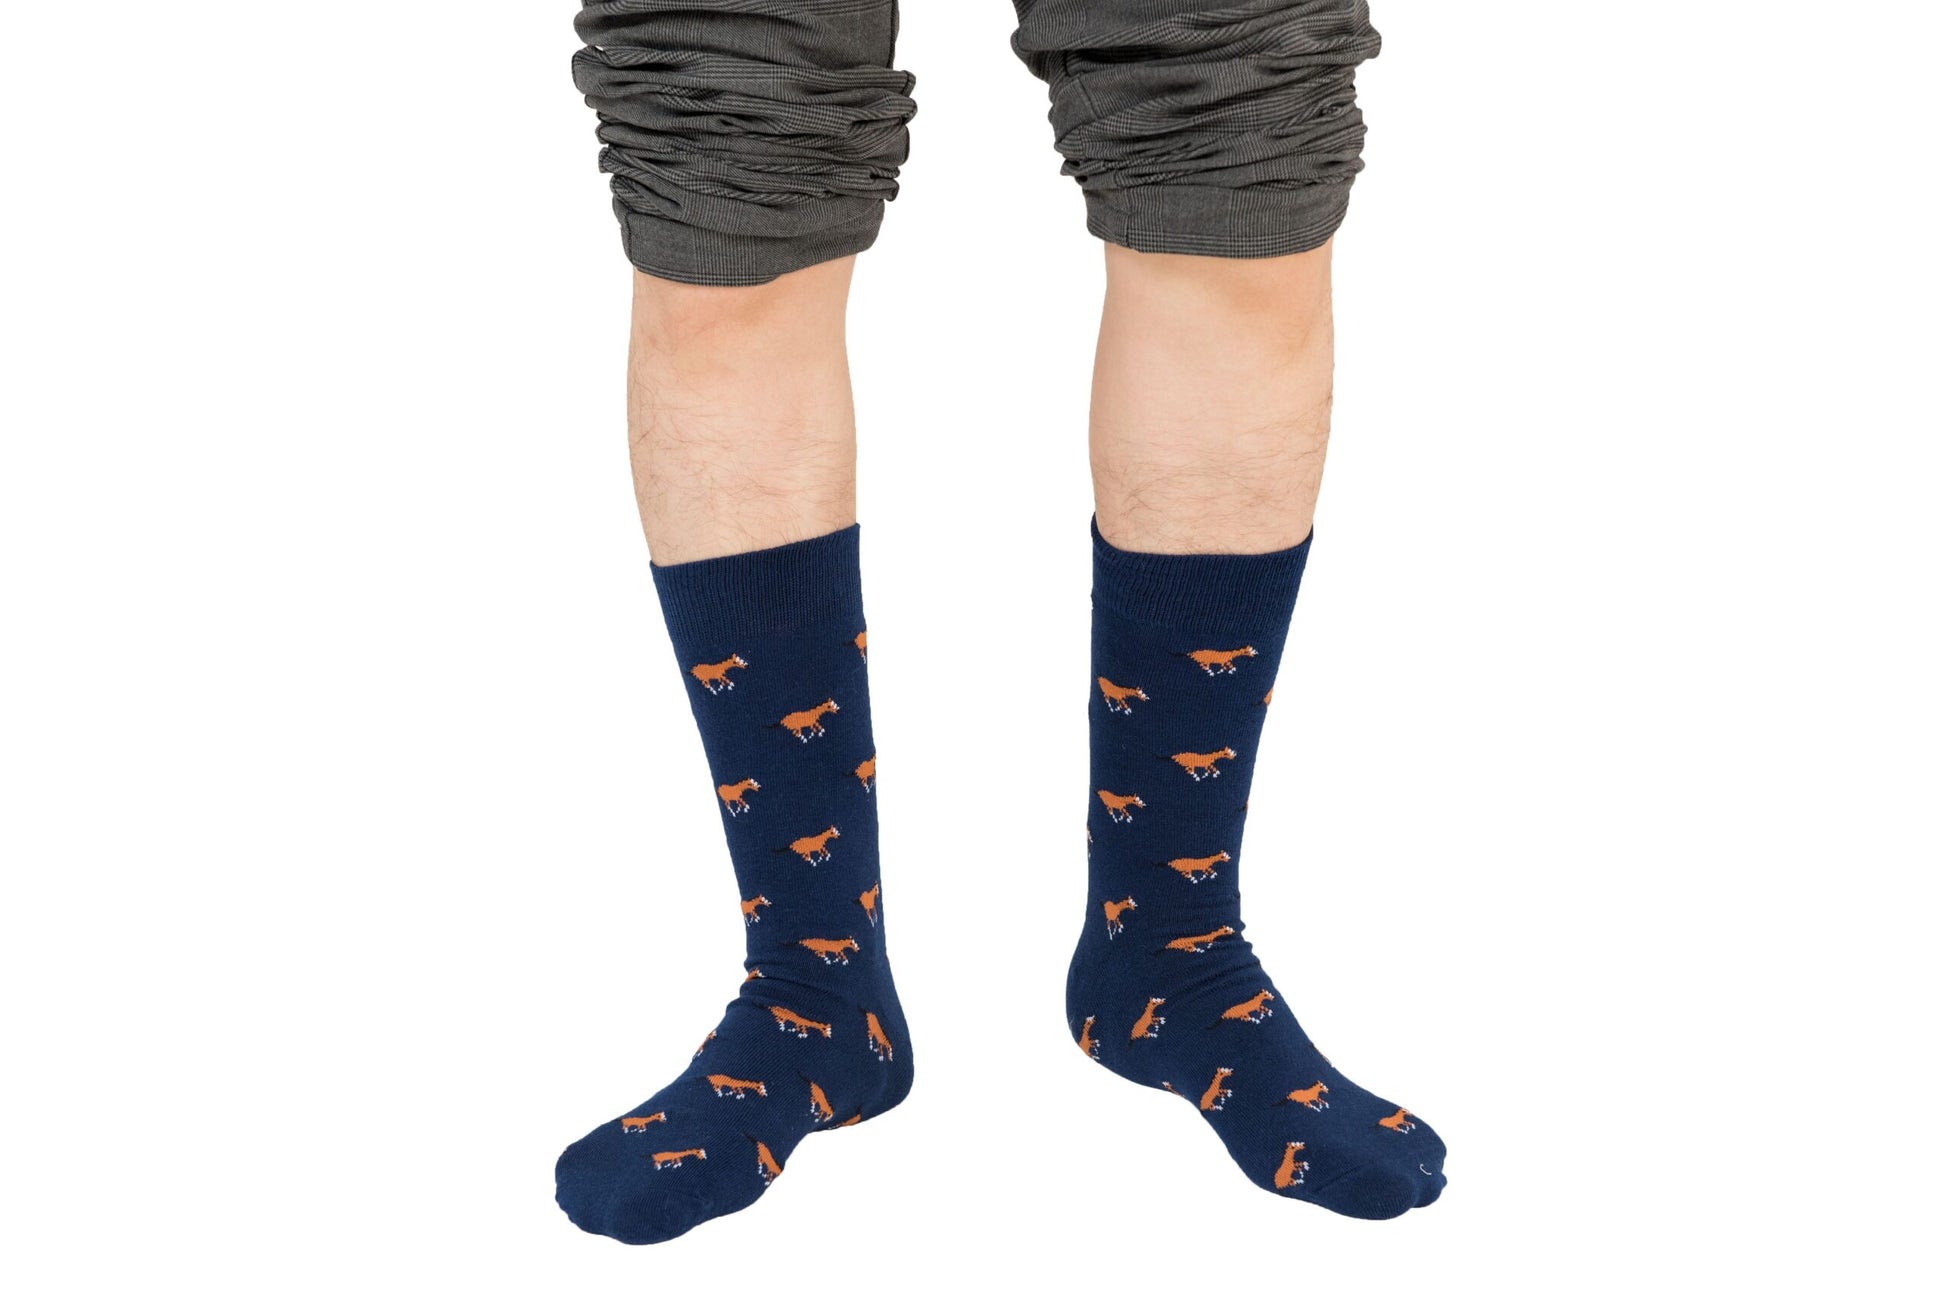 A boy wearing a pair of Horse Socks with orange foxes on them.